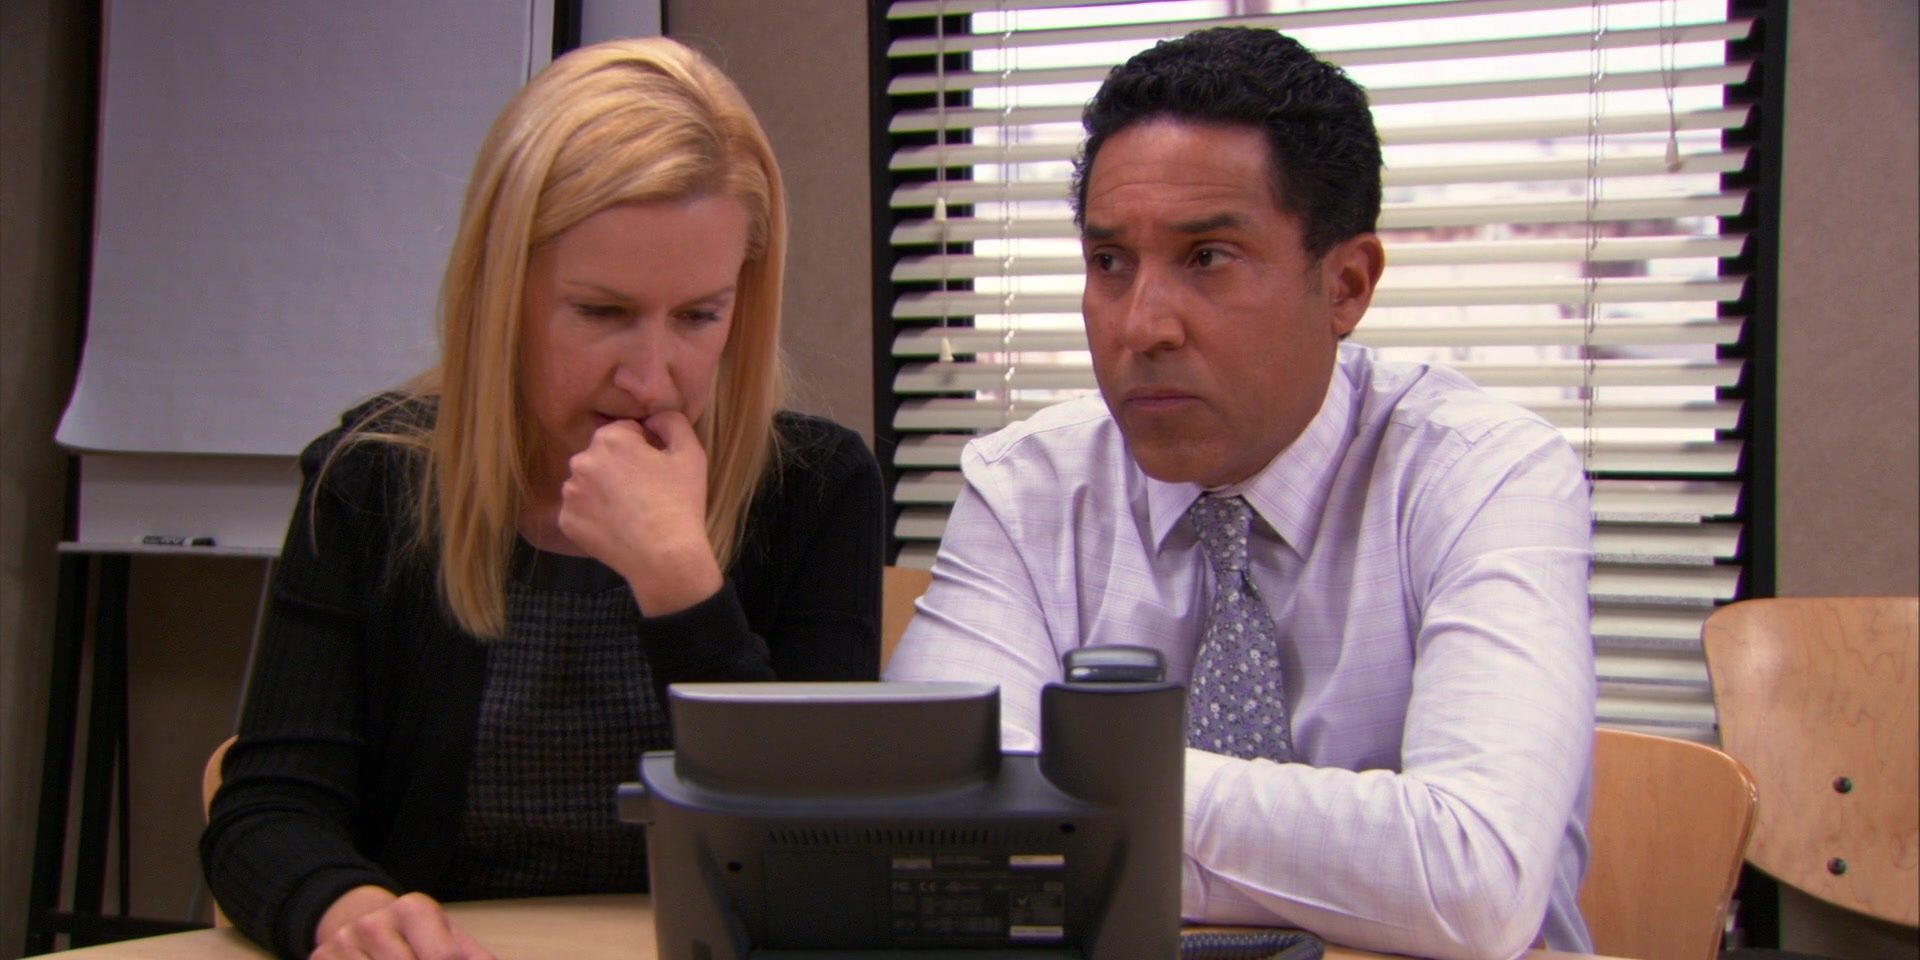 Oscar and Angela talking on the phone on The Office.